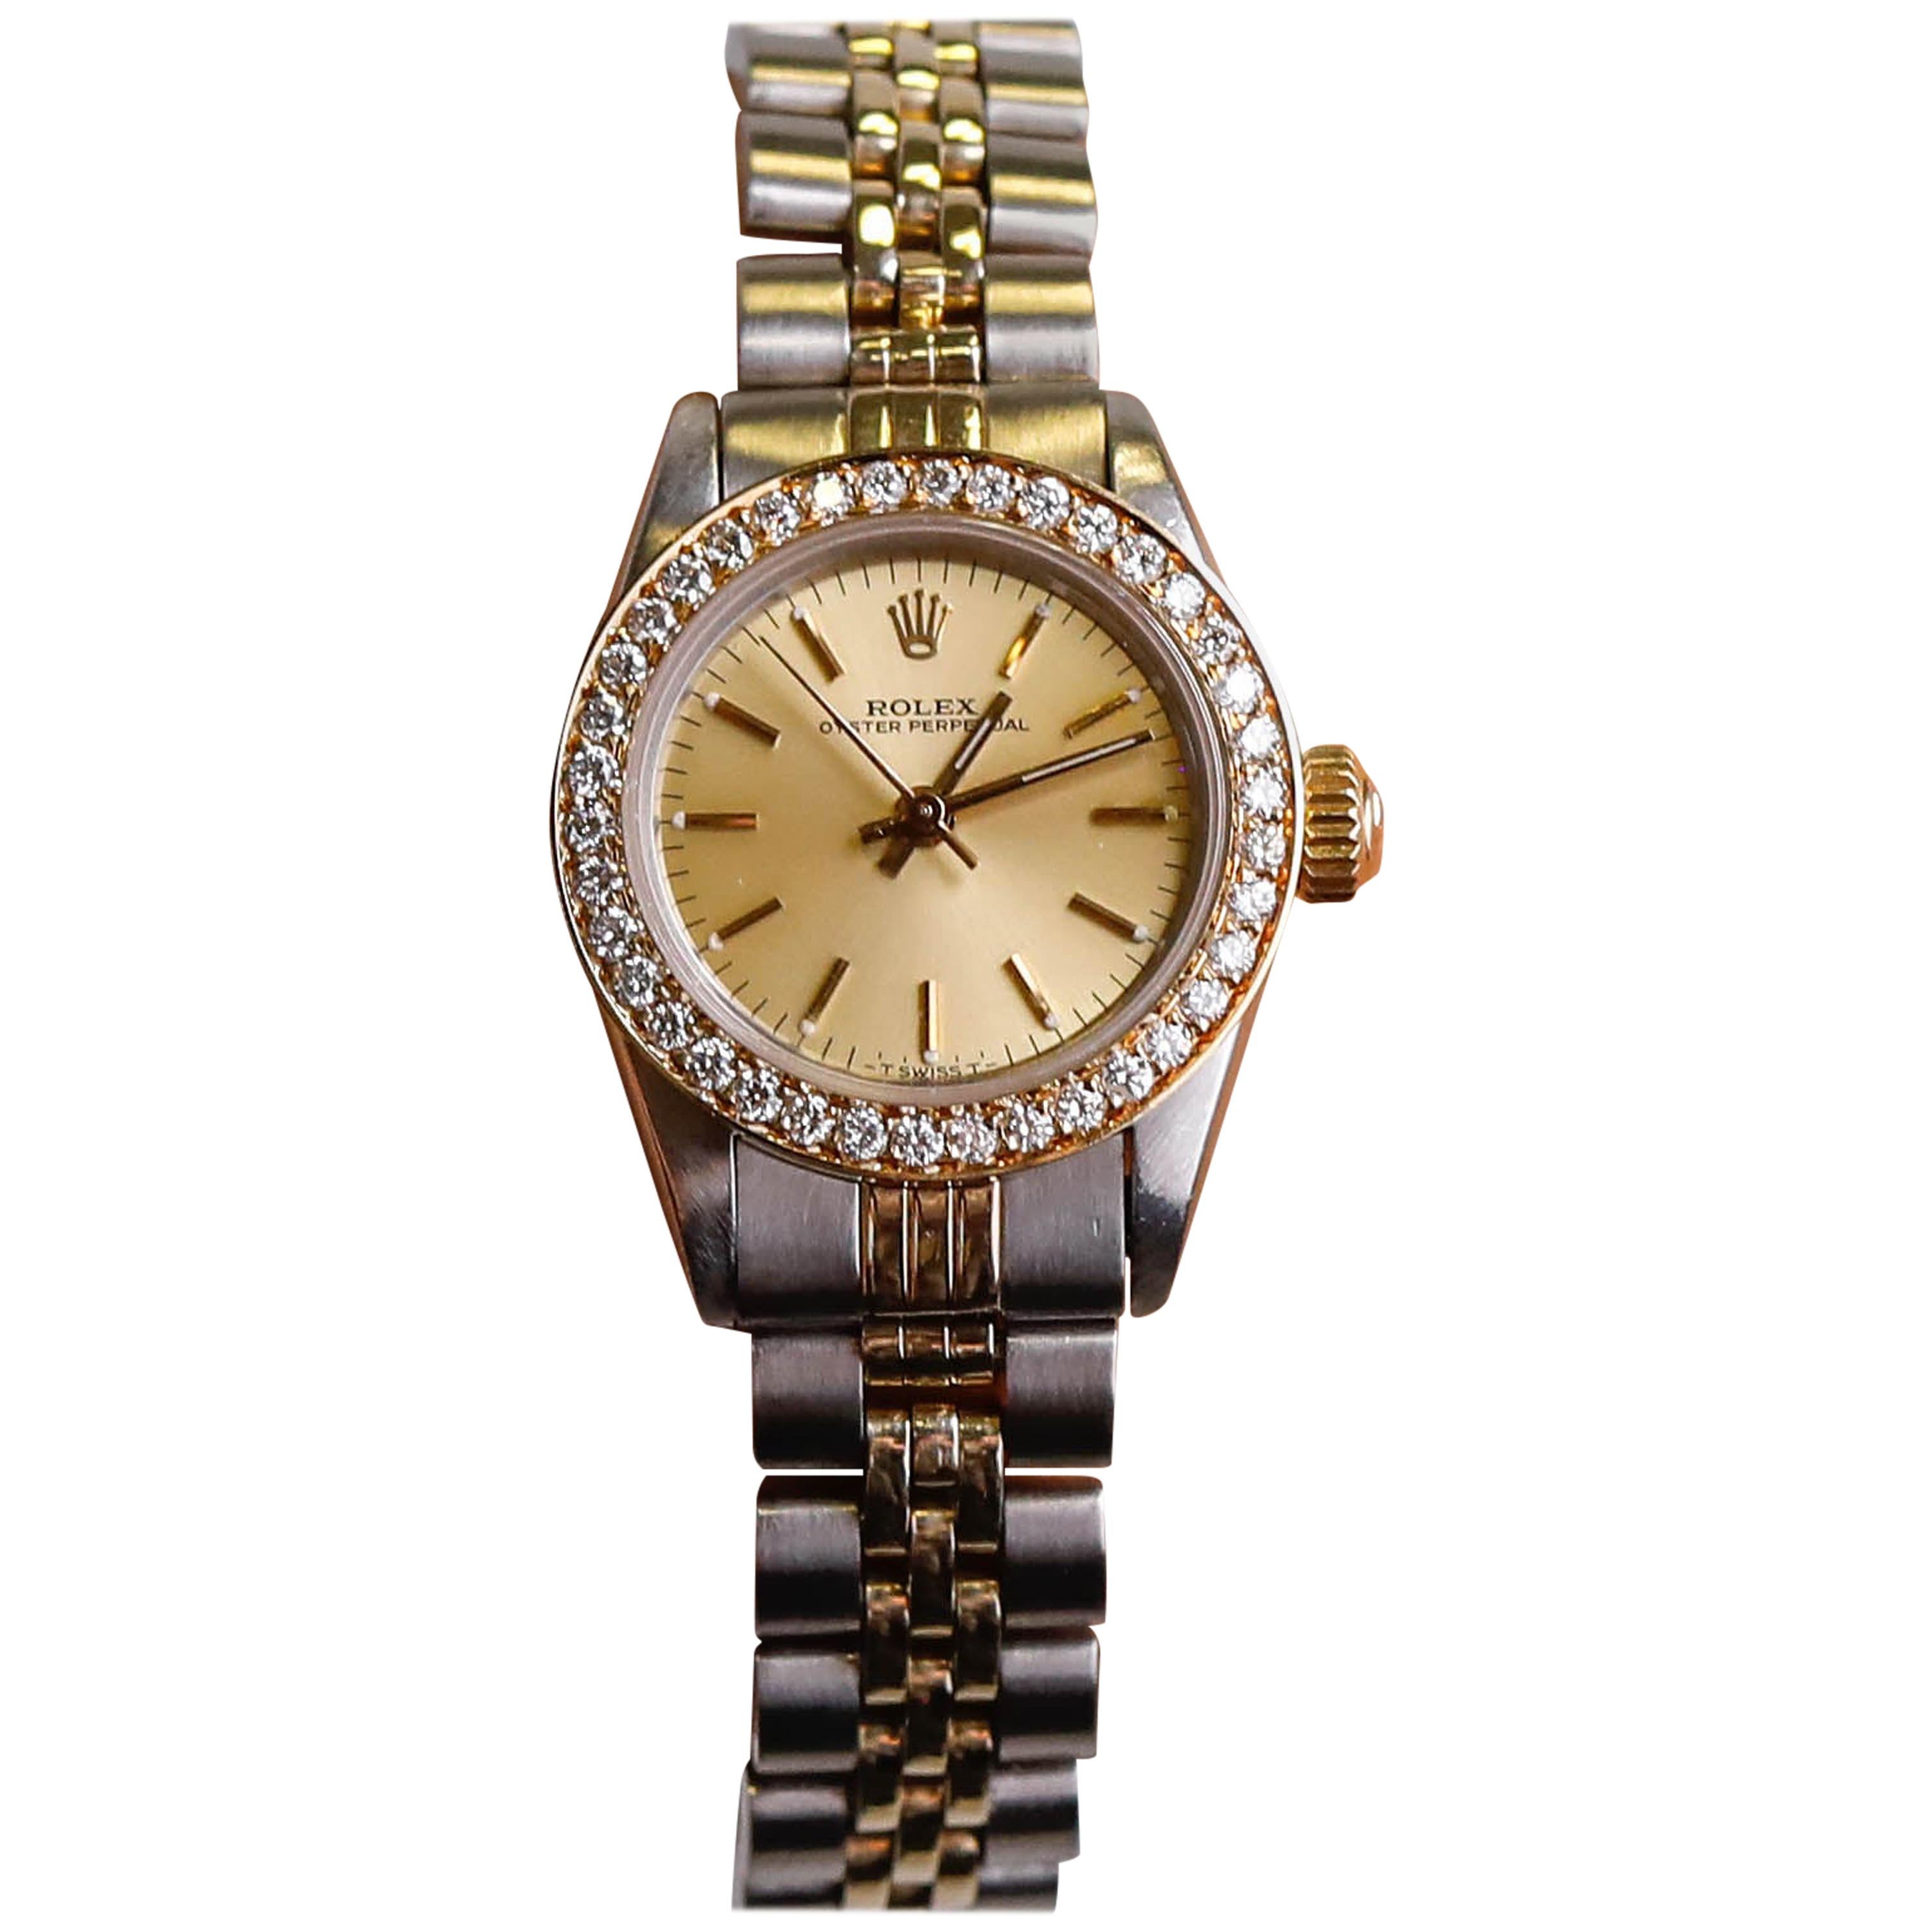 Rolex Oyster Perpetual Champagne Color Dial Diamond Wristwatch